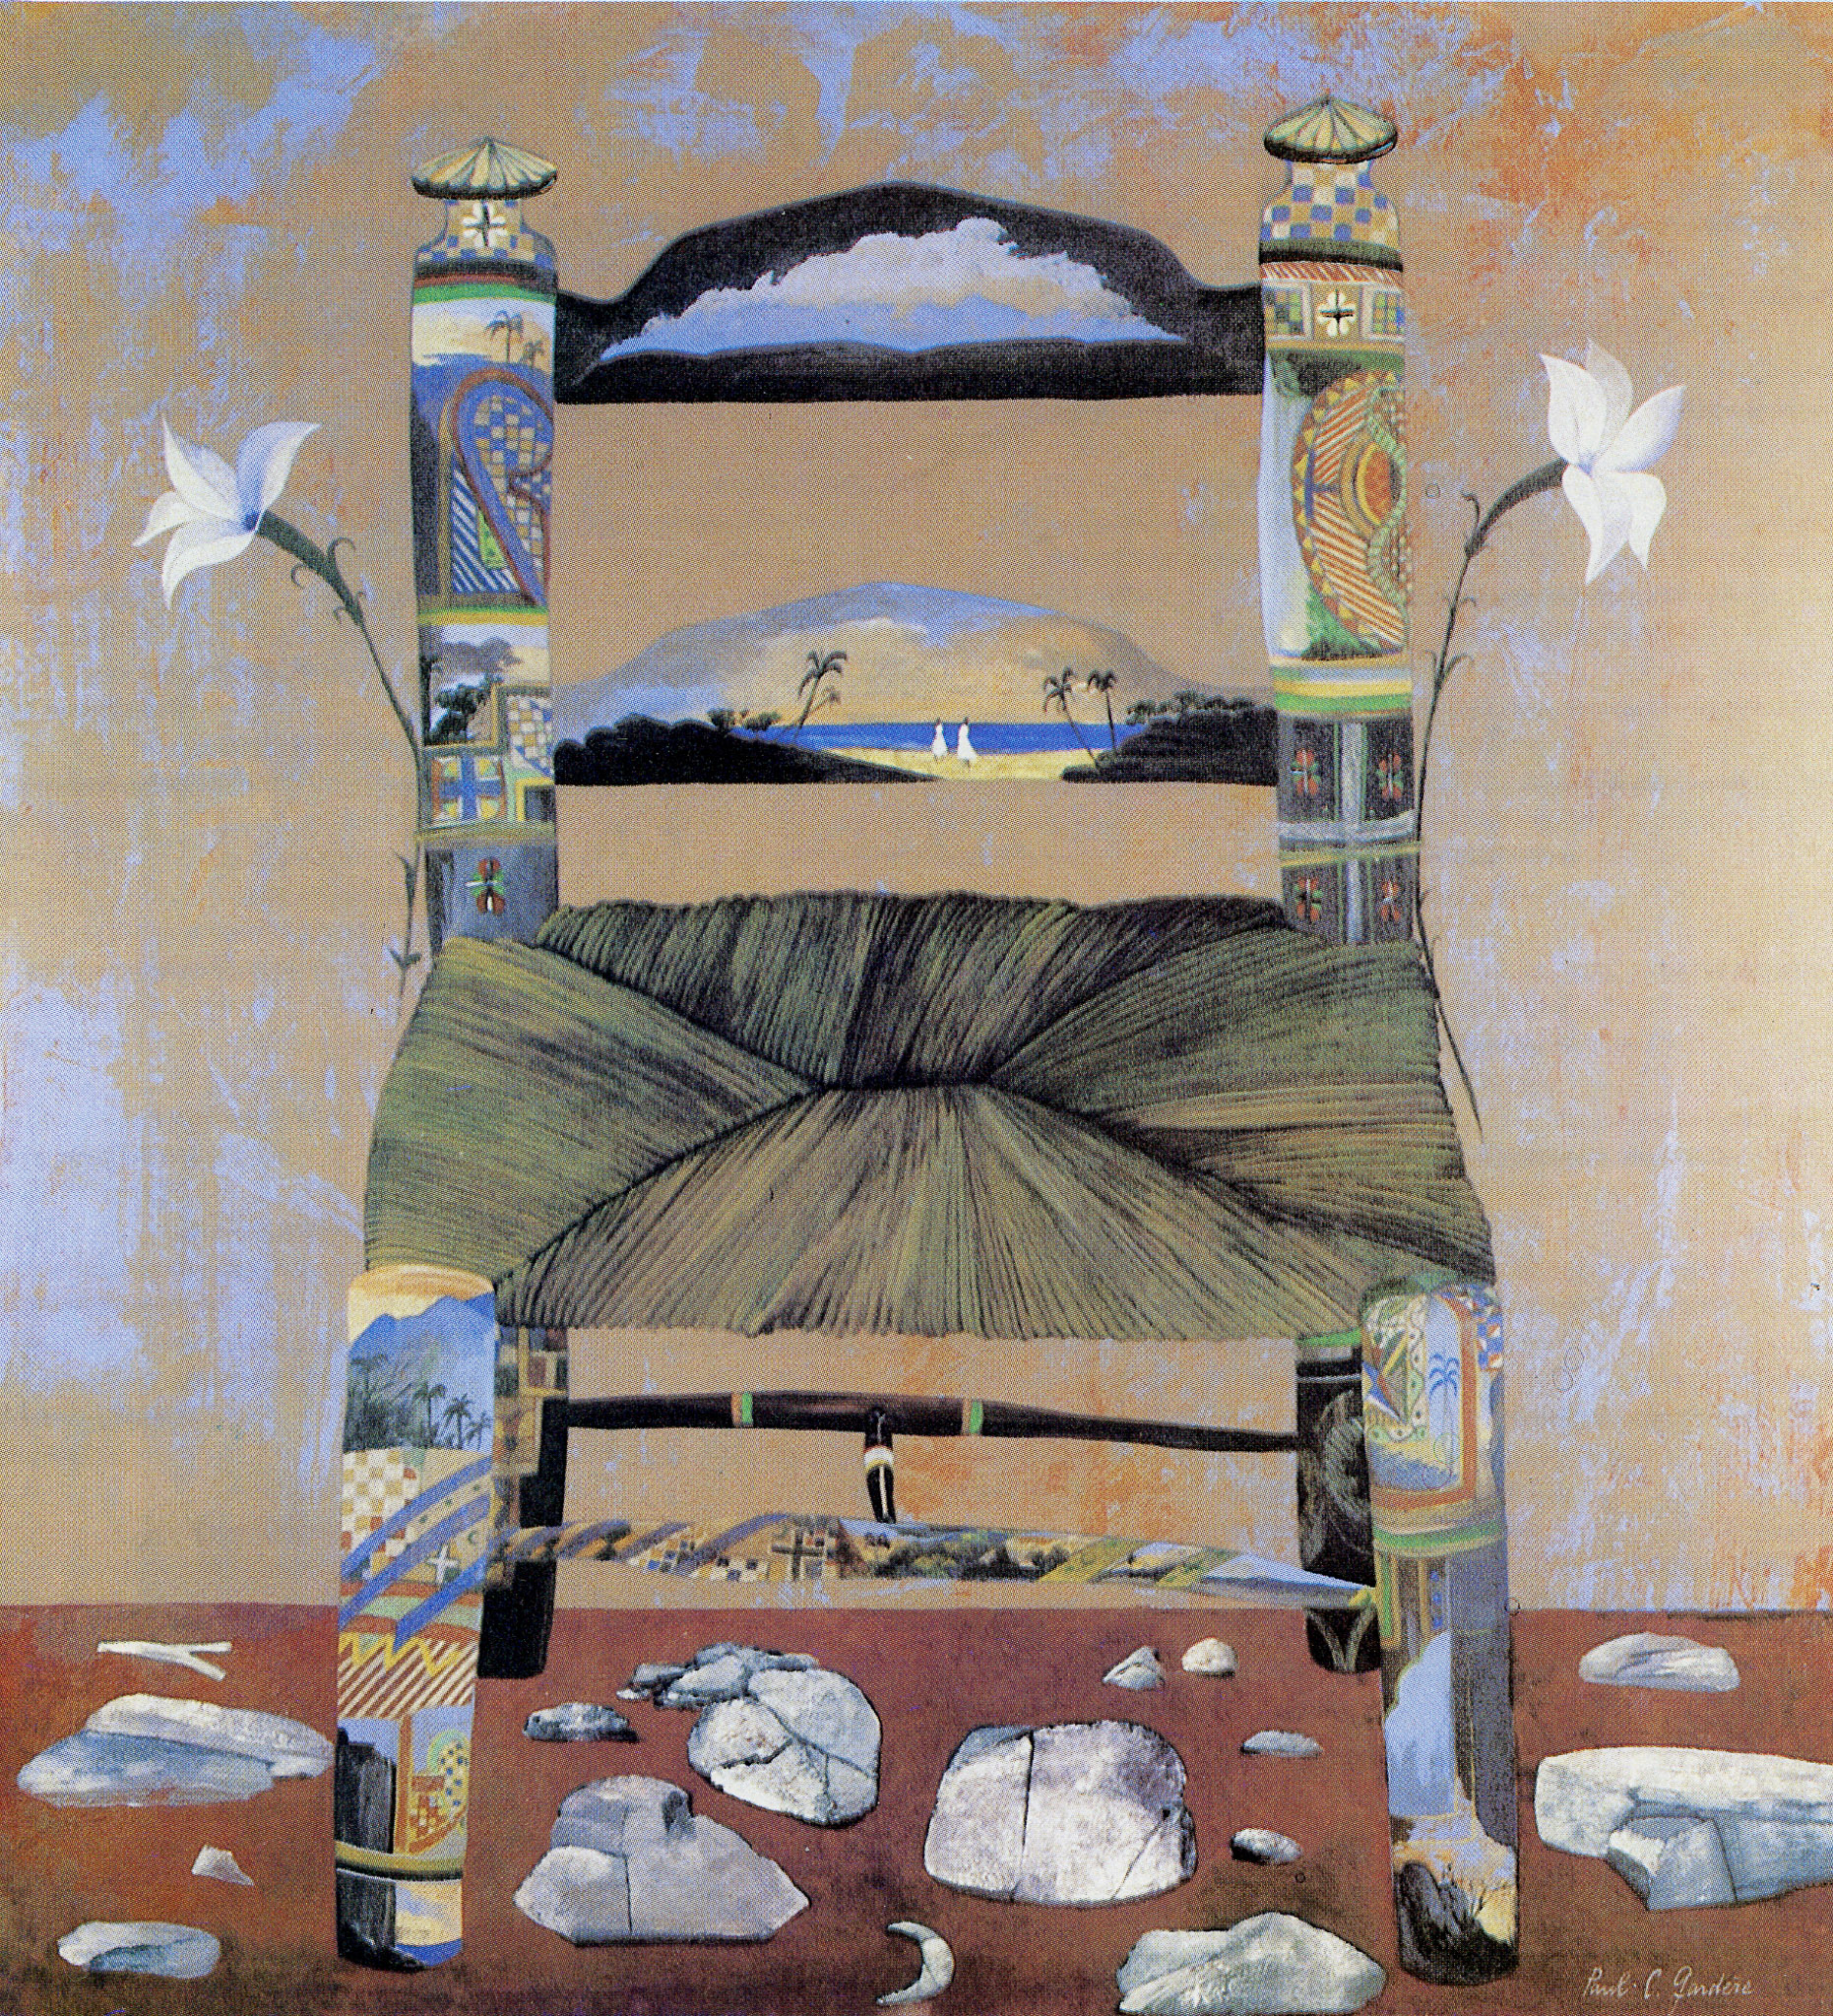 The Throne and the Kingdom, 1982